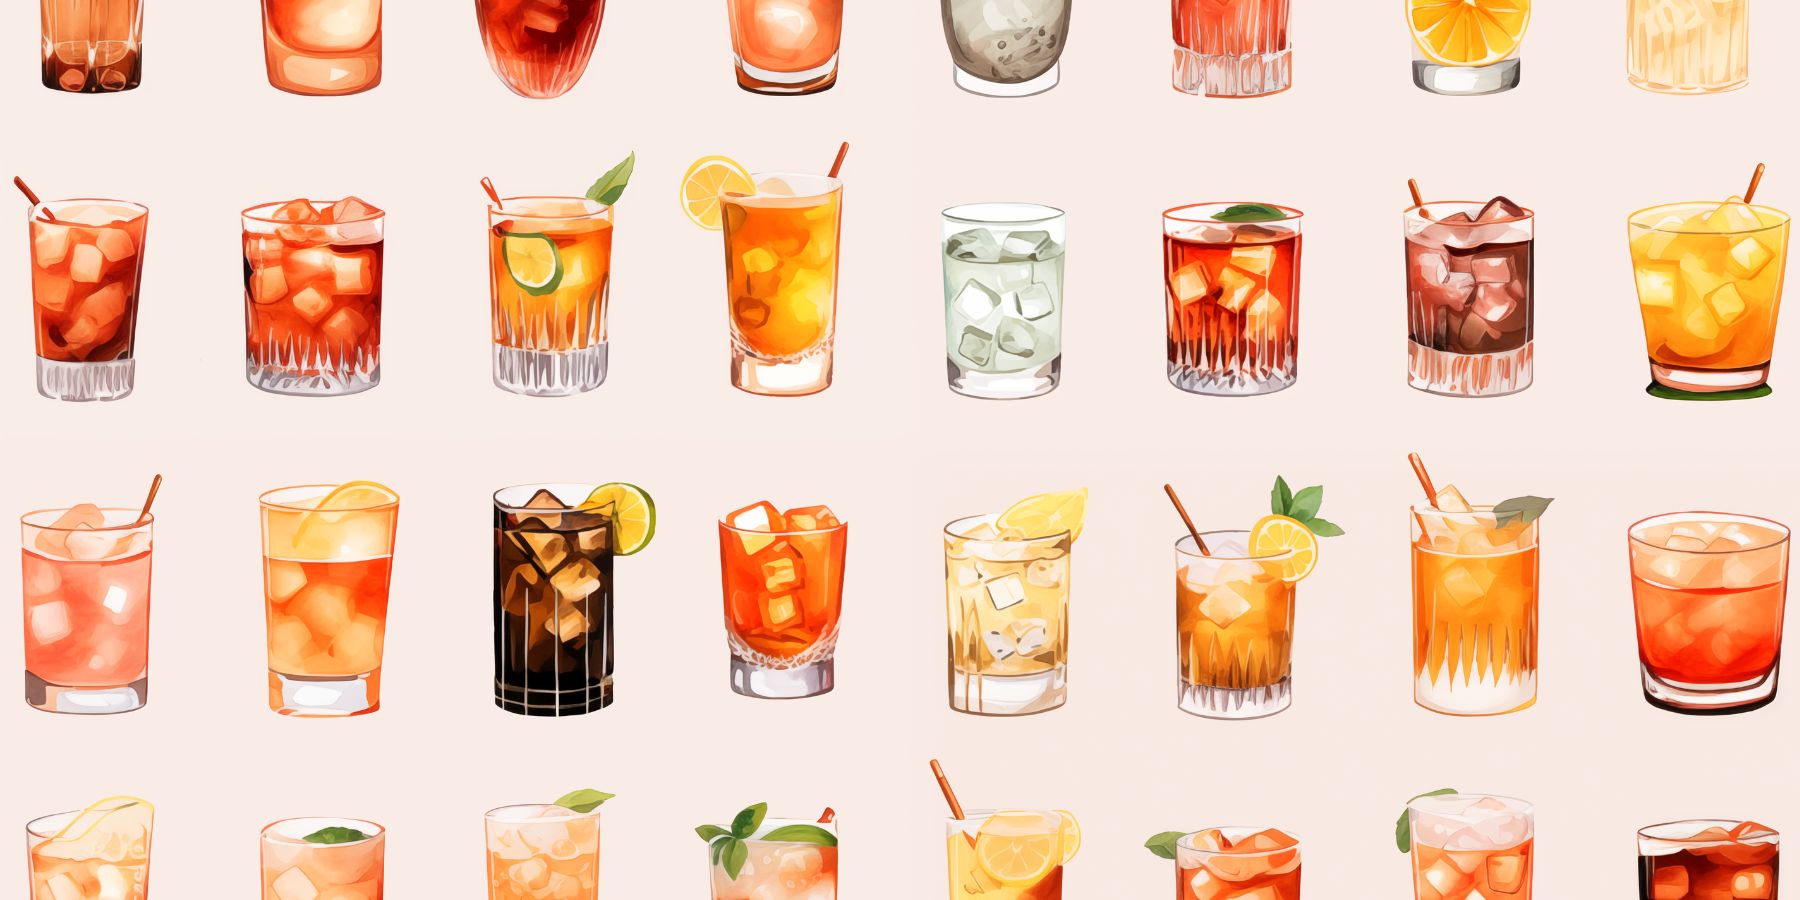 17 Whiskey Mixers (What to Mix with Whiskey) - The Mixer